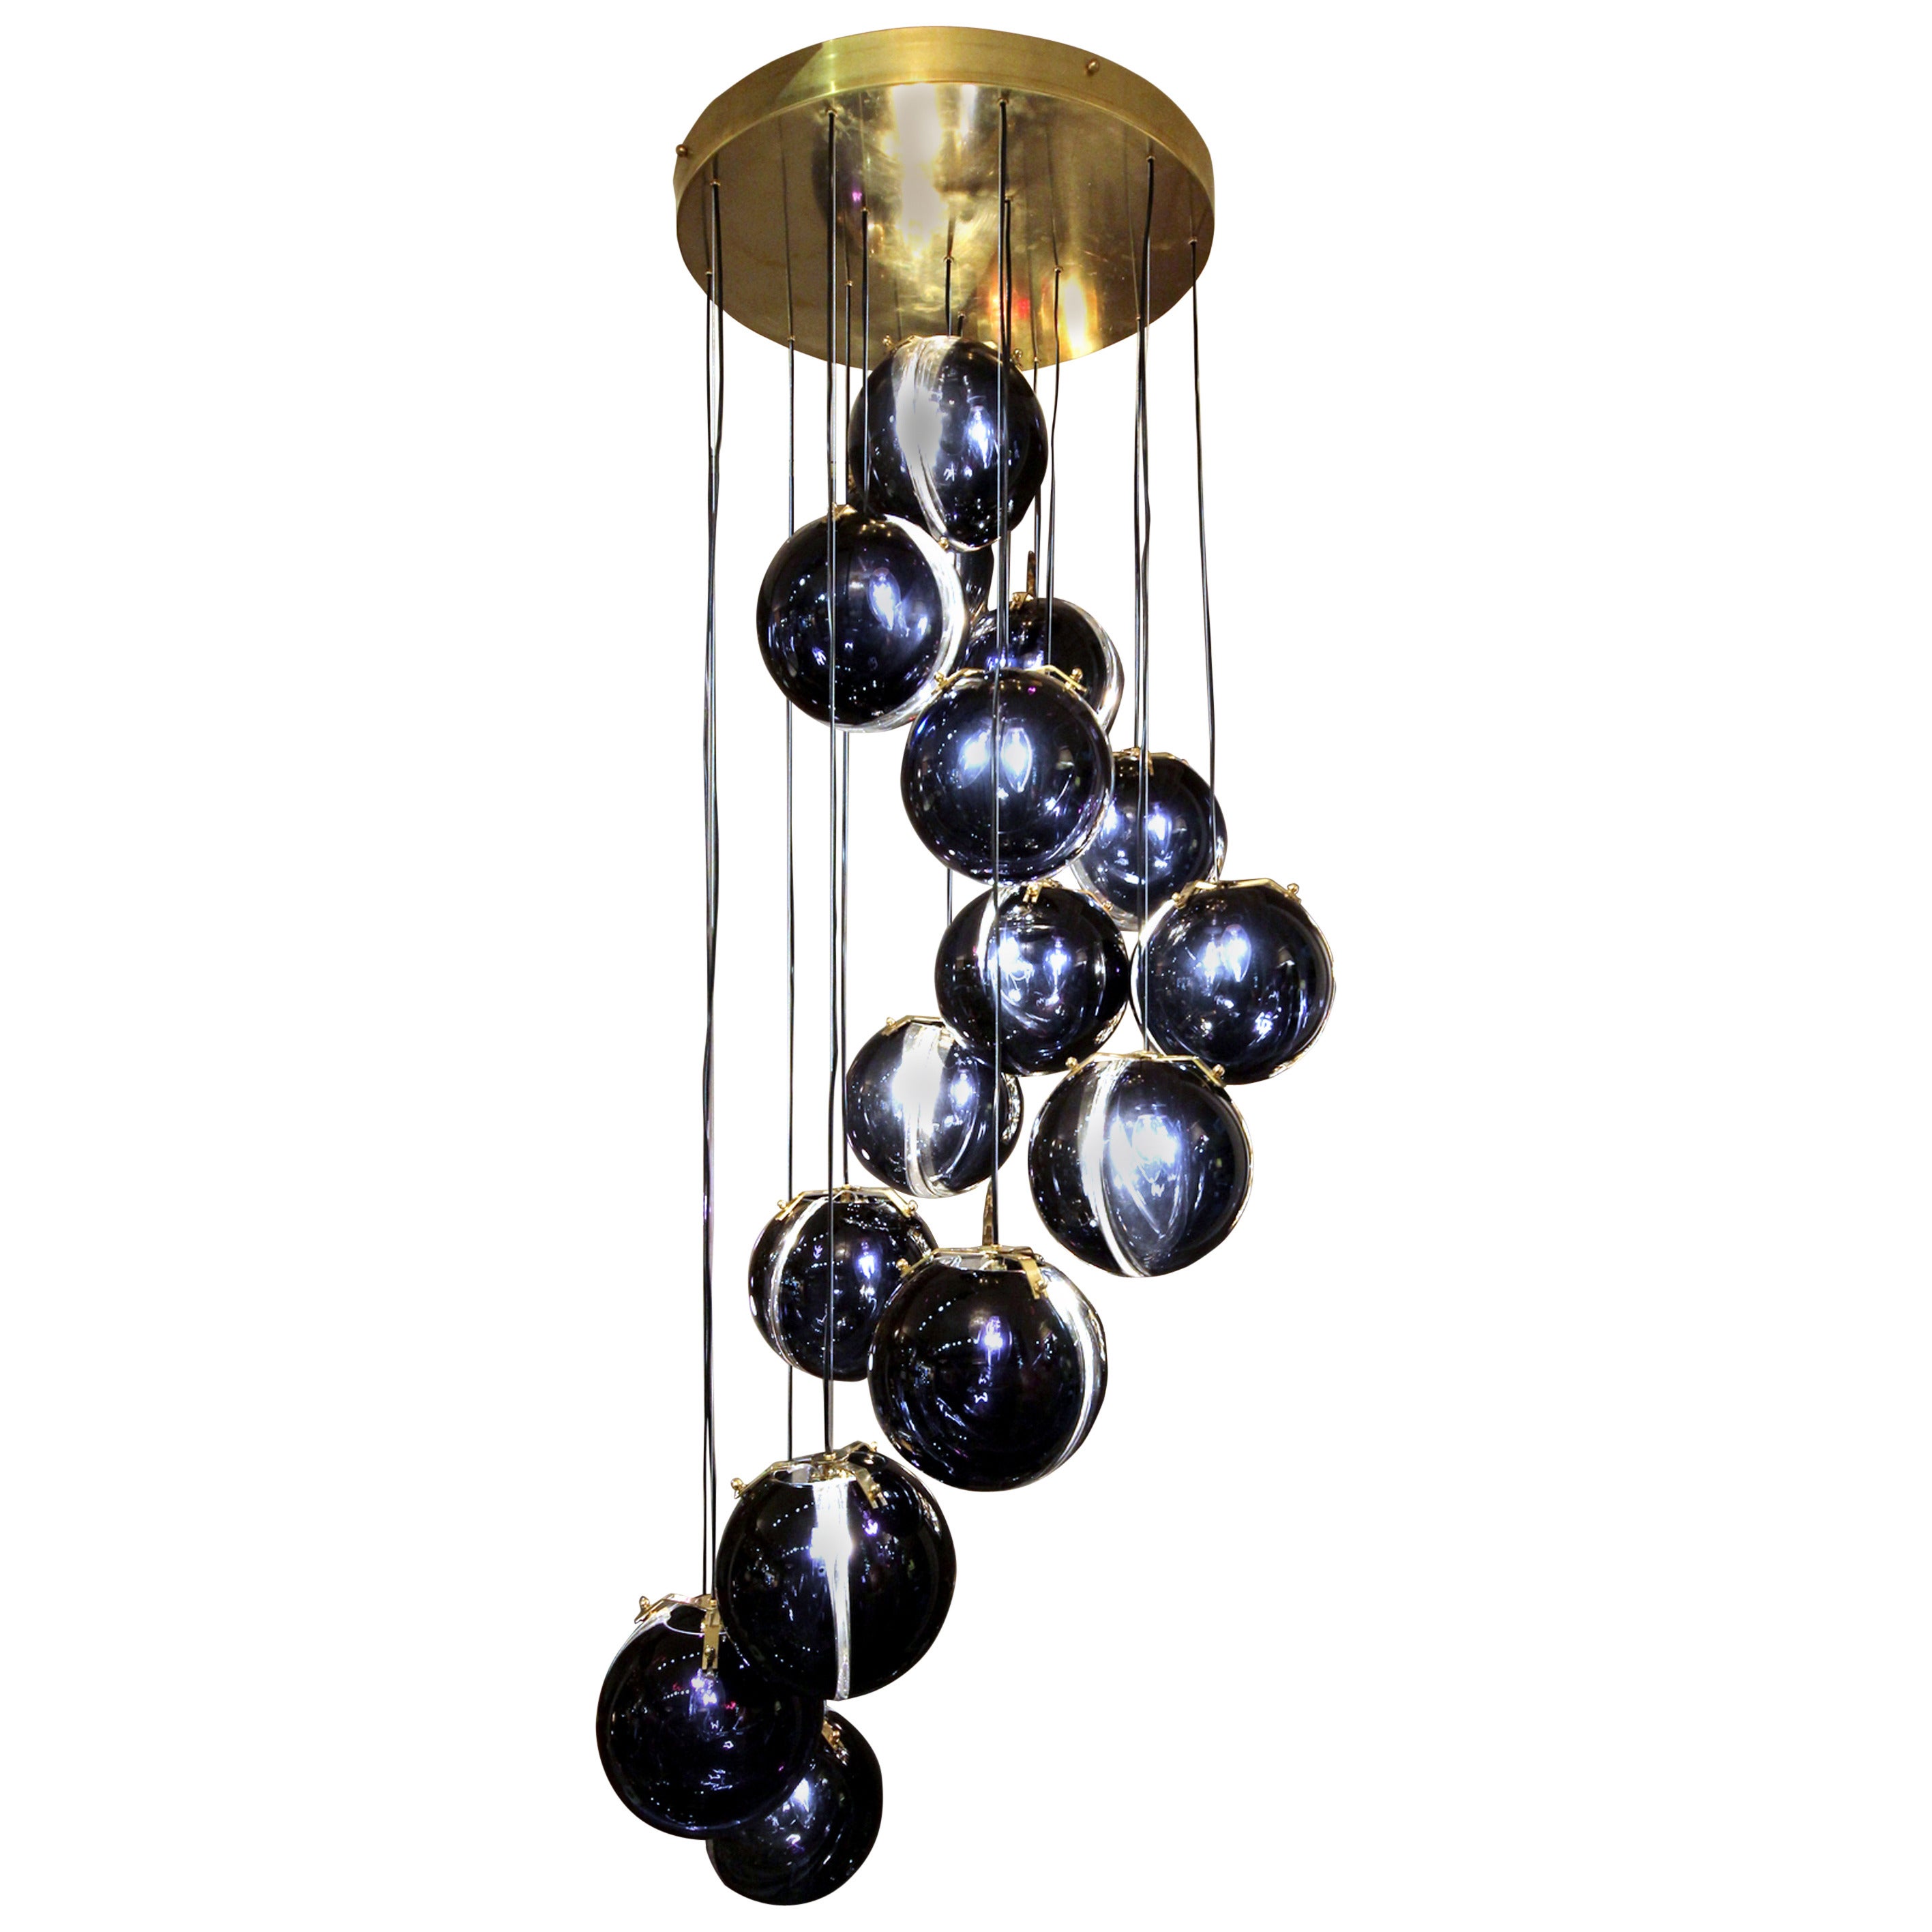 1970s Murano Chandelier with 16 Blue Glass Globes